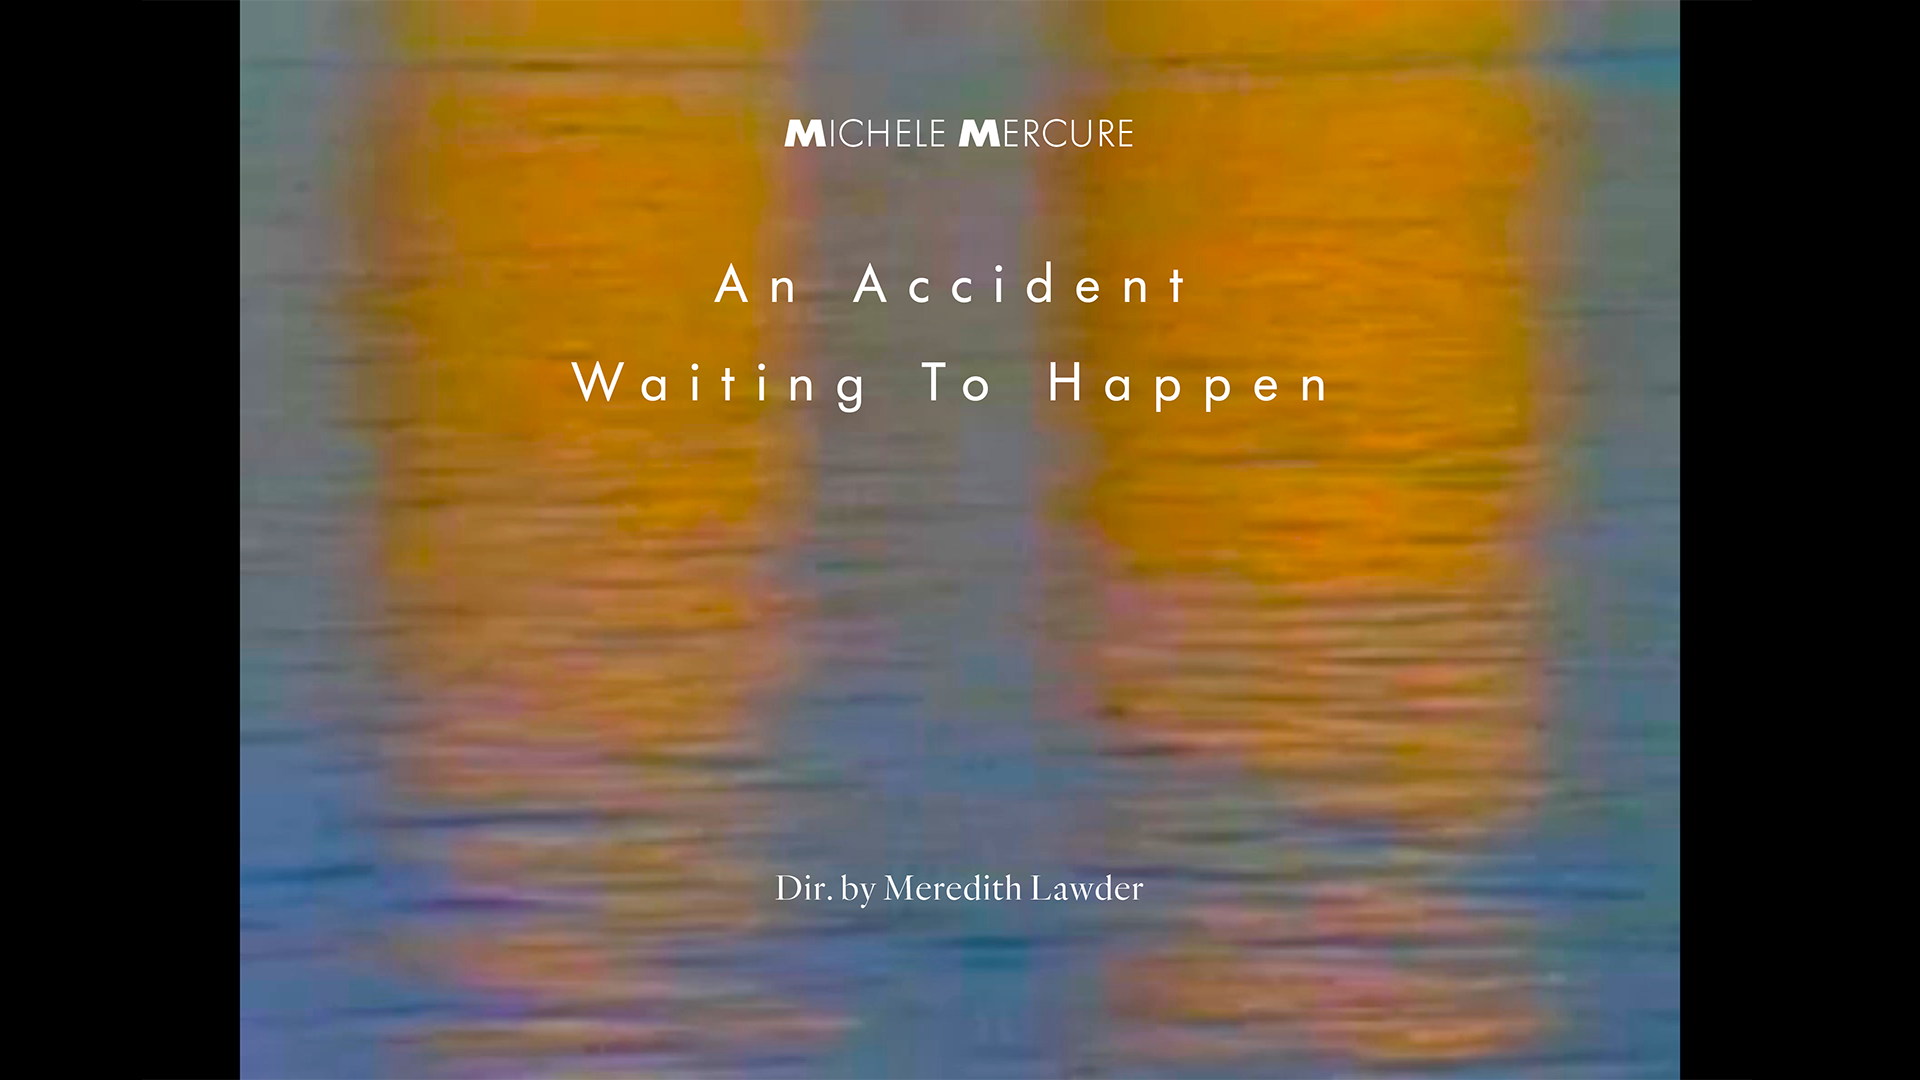 Link to Video for Michele Mercure – An Accident Waiting To Happen